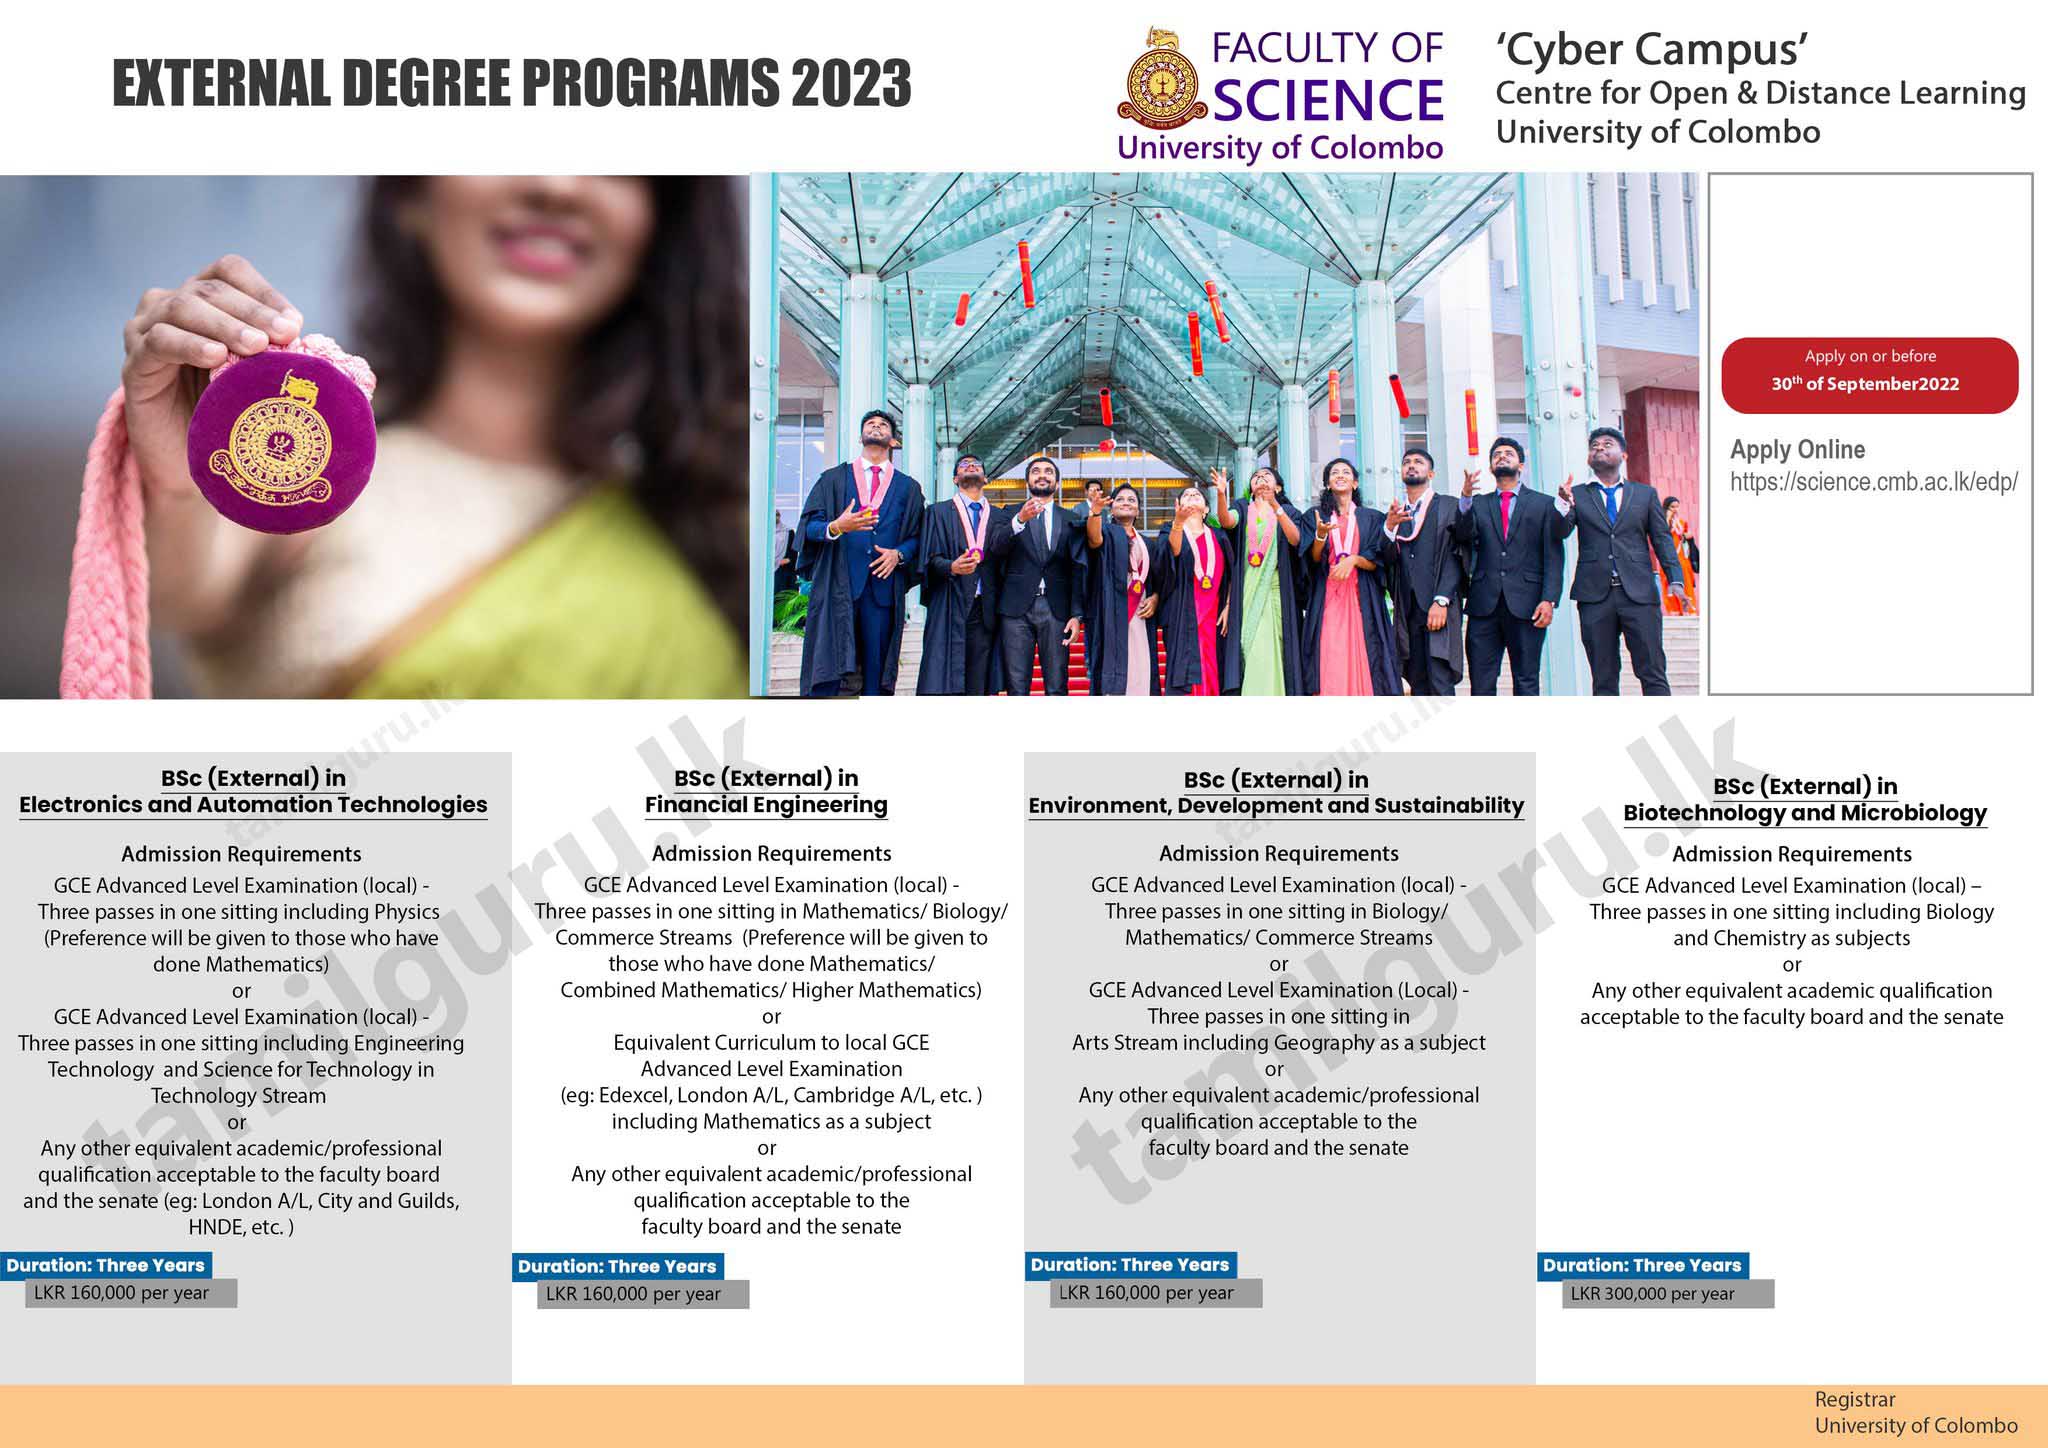 Calling Applications for Bachelor of Science (B.Sc) External Degree Programmes 2022/2023 - Cyber Campus, University of Colombo